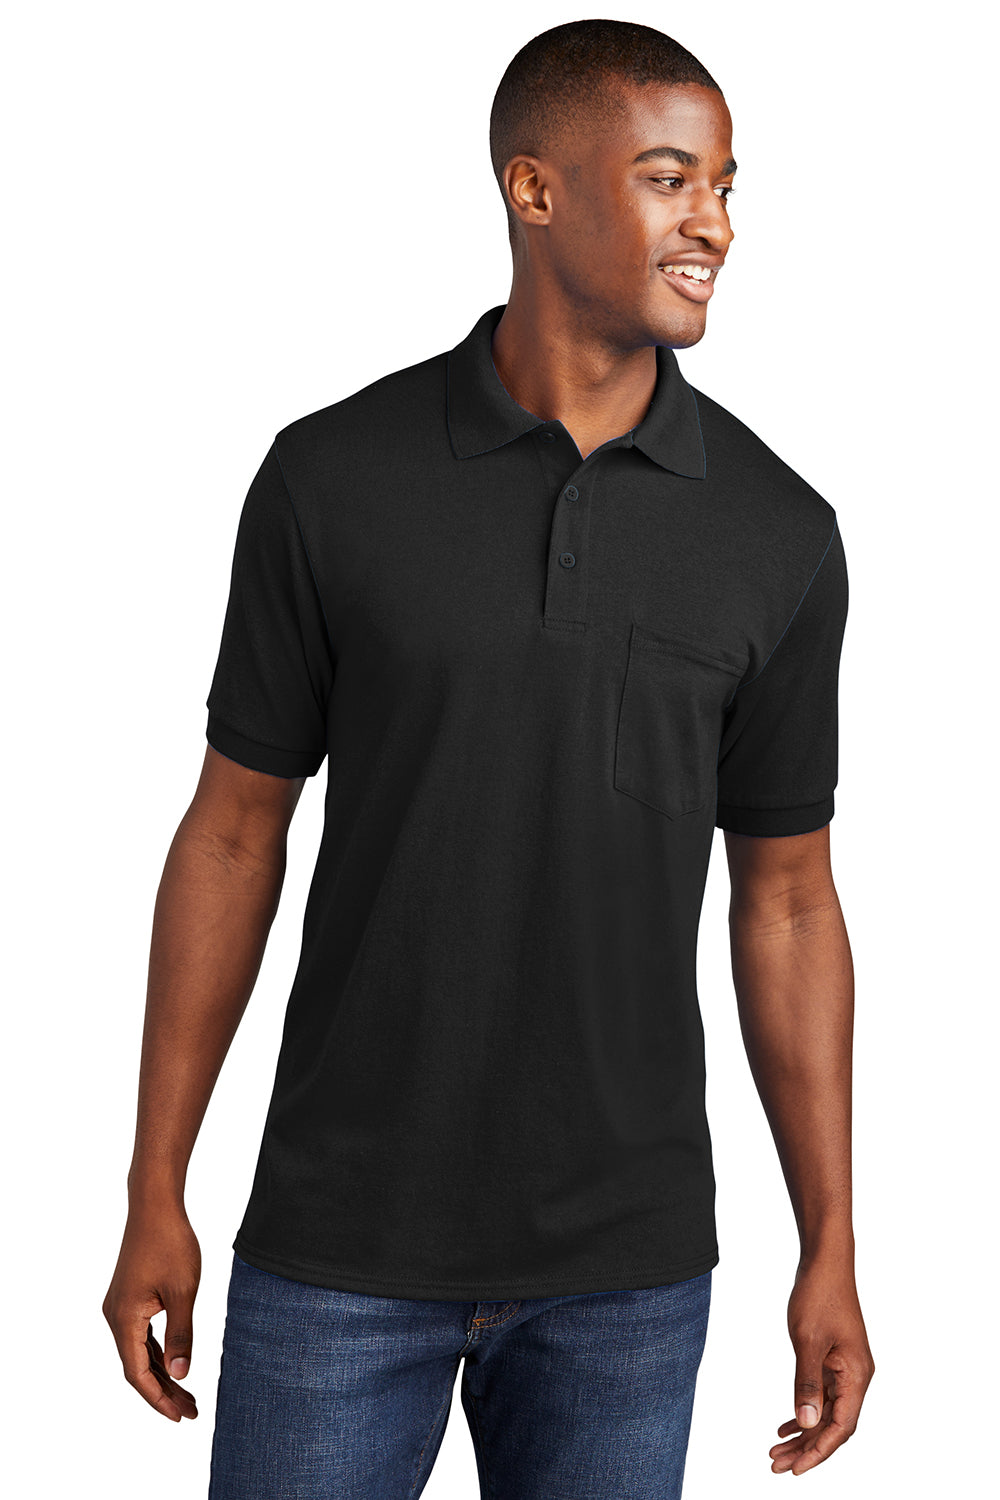 Port & Company KP55P Mens Core Stain Resistant Short Sleeve Polo Shirt w/ Pocket Black Front